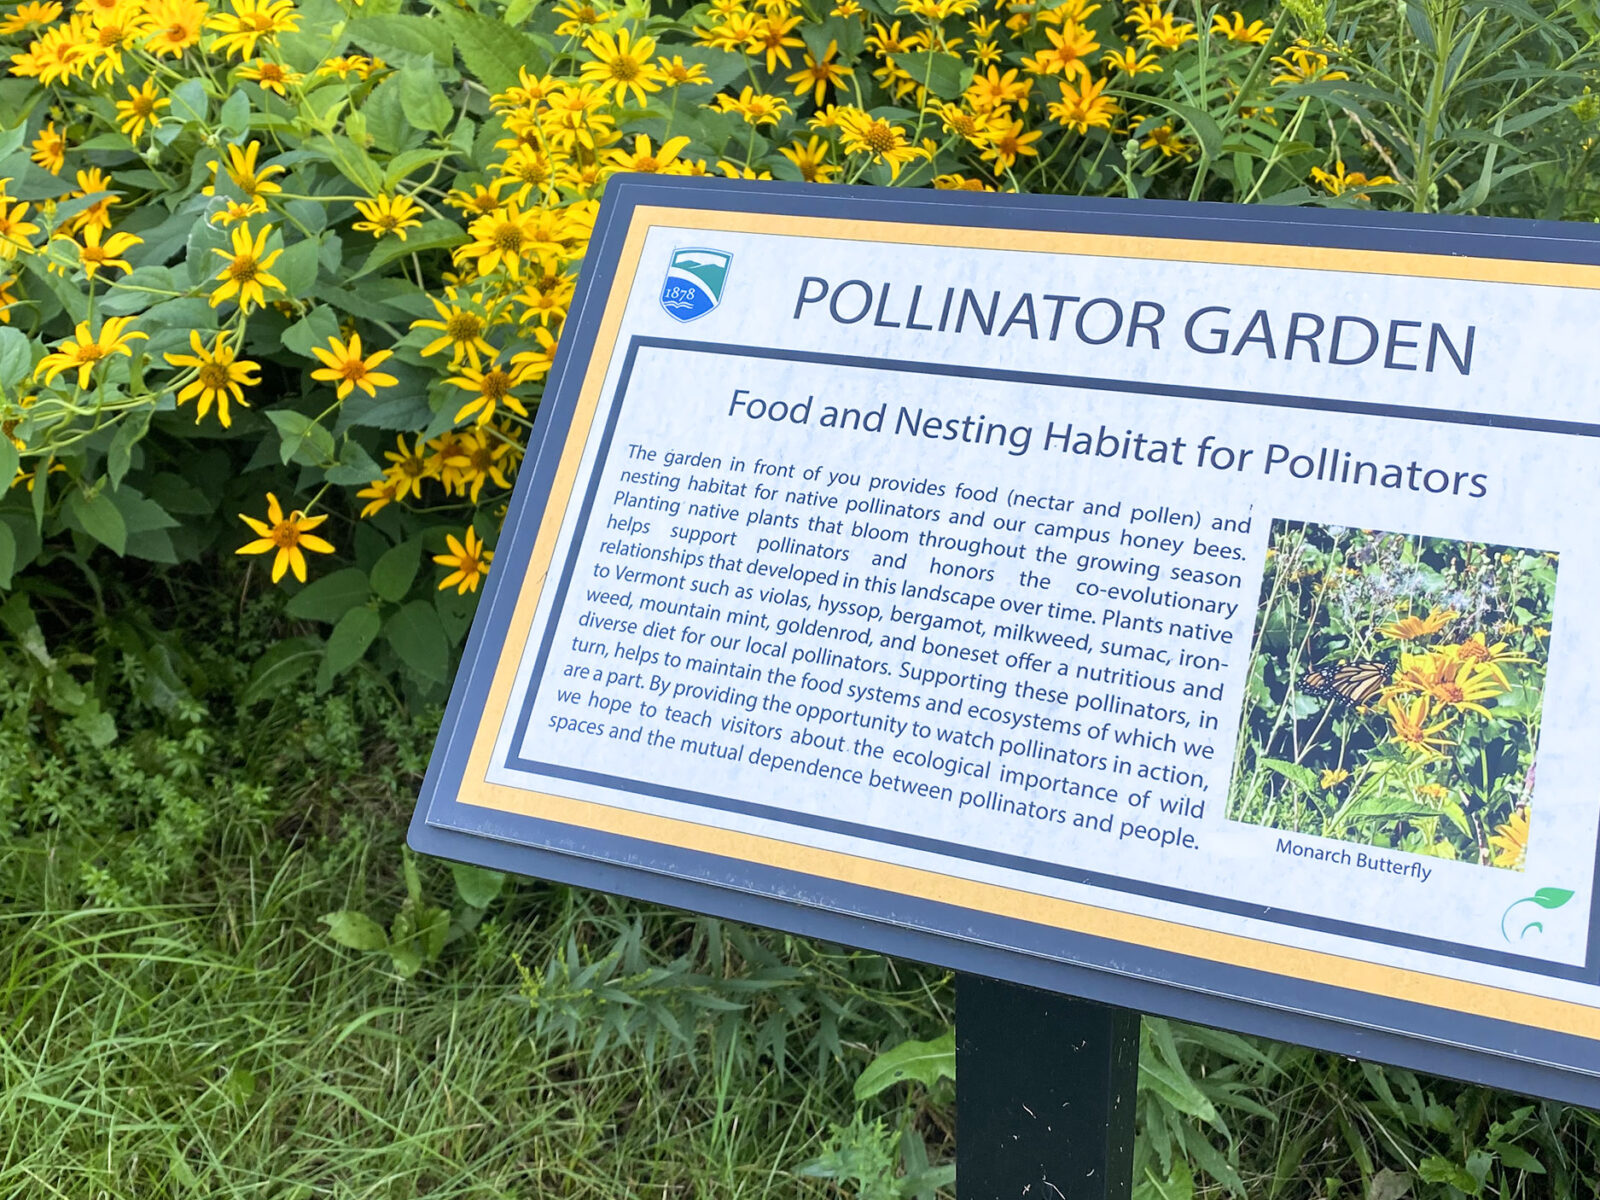 outdoor sign placed near flowers that talks about the pollinator garden